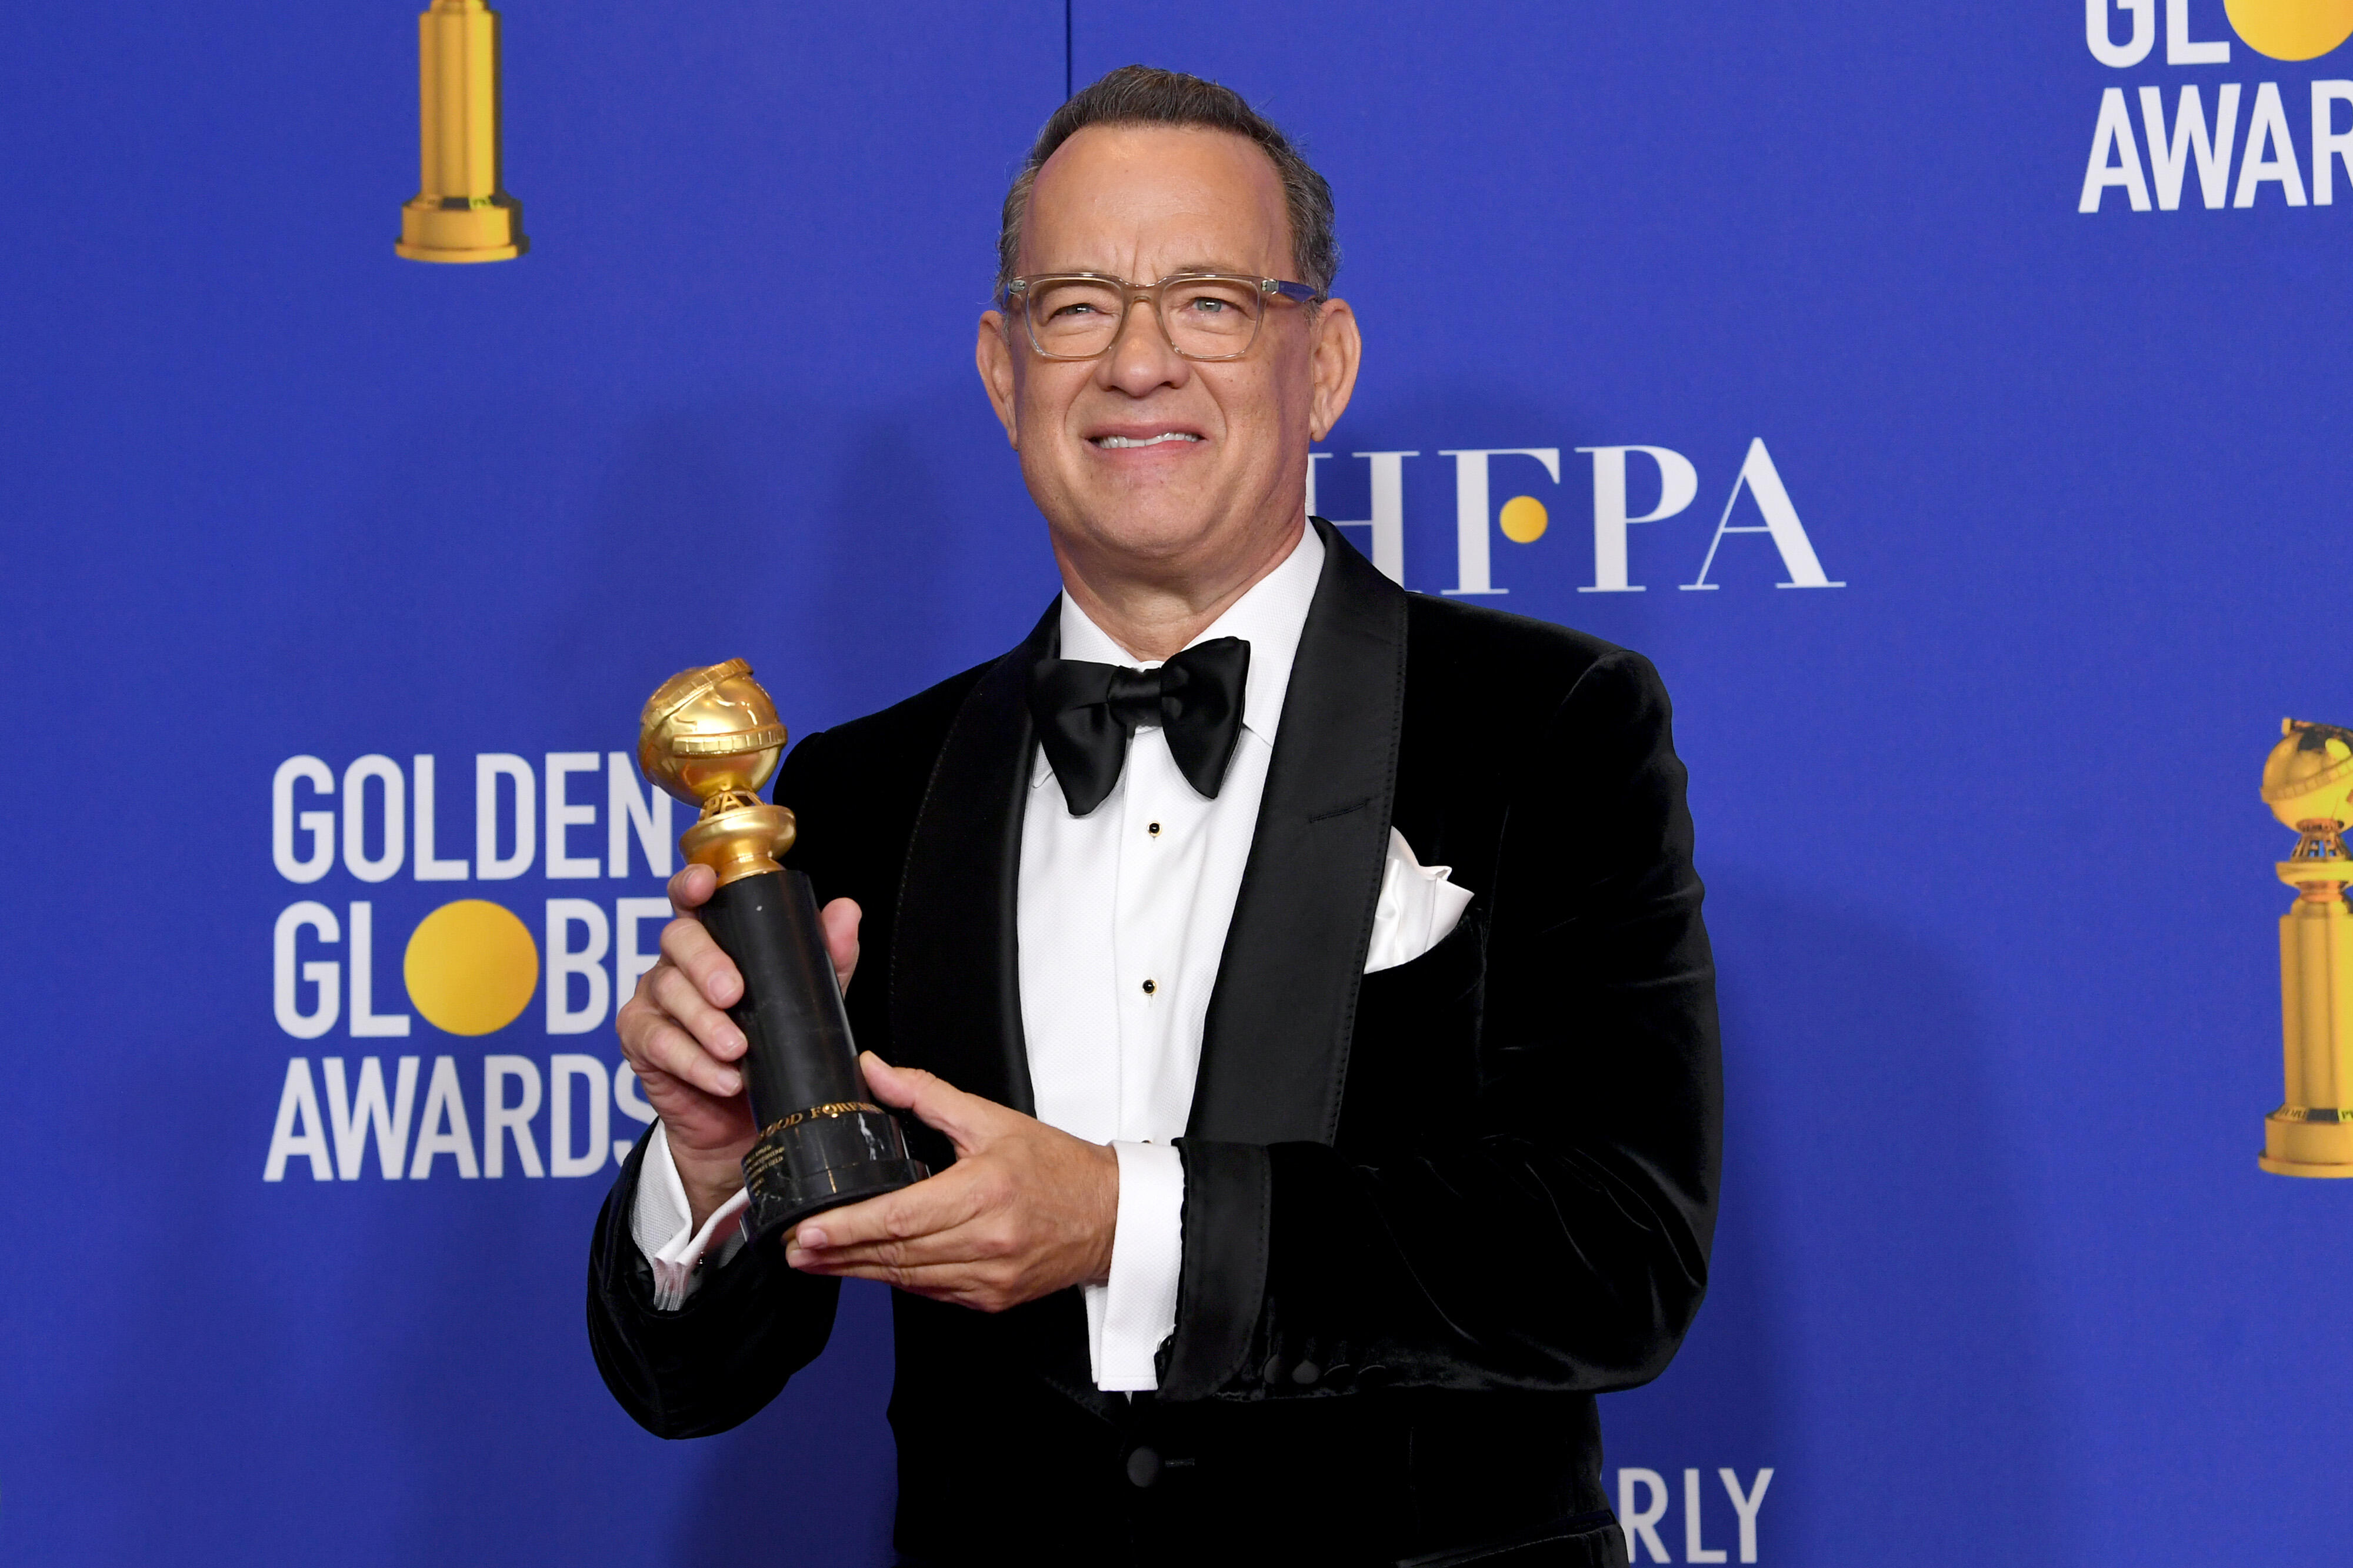 Tom Hanks is The First Award Show Meme of The Decade [PHOTOS] - Thumbnail Image